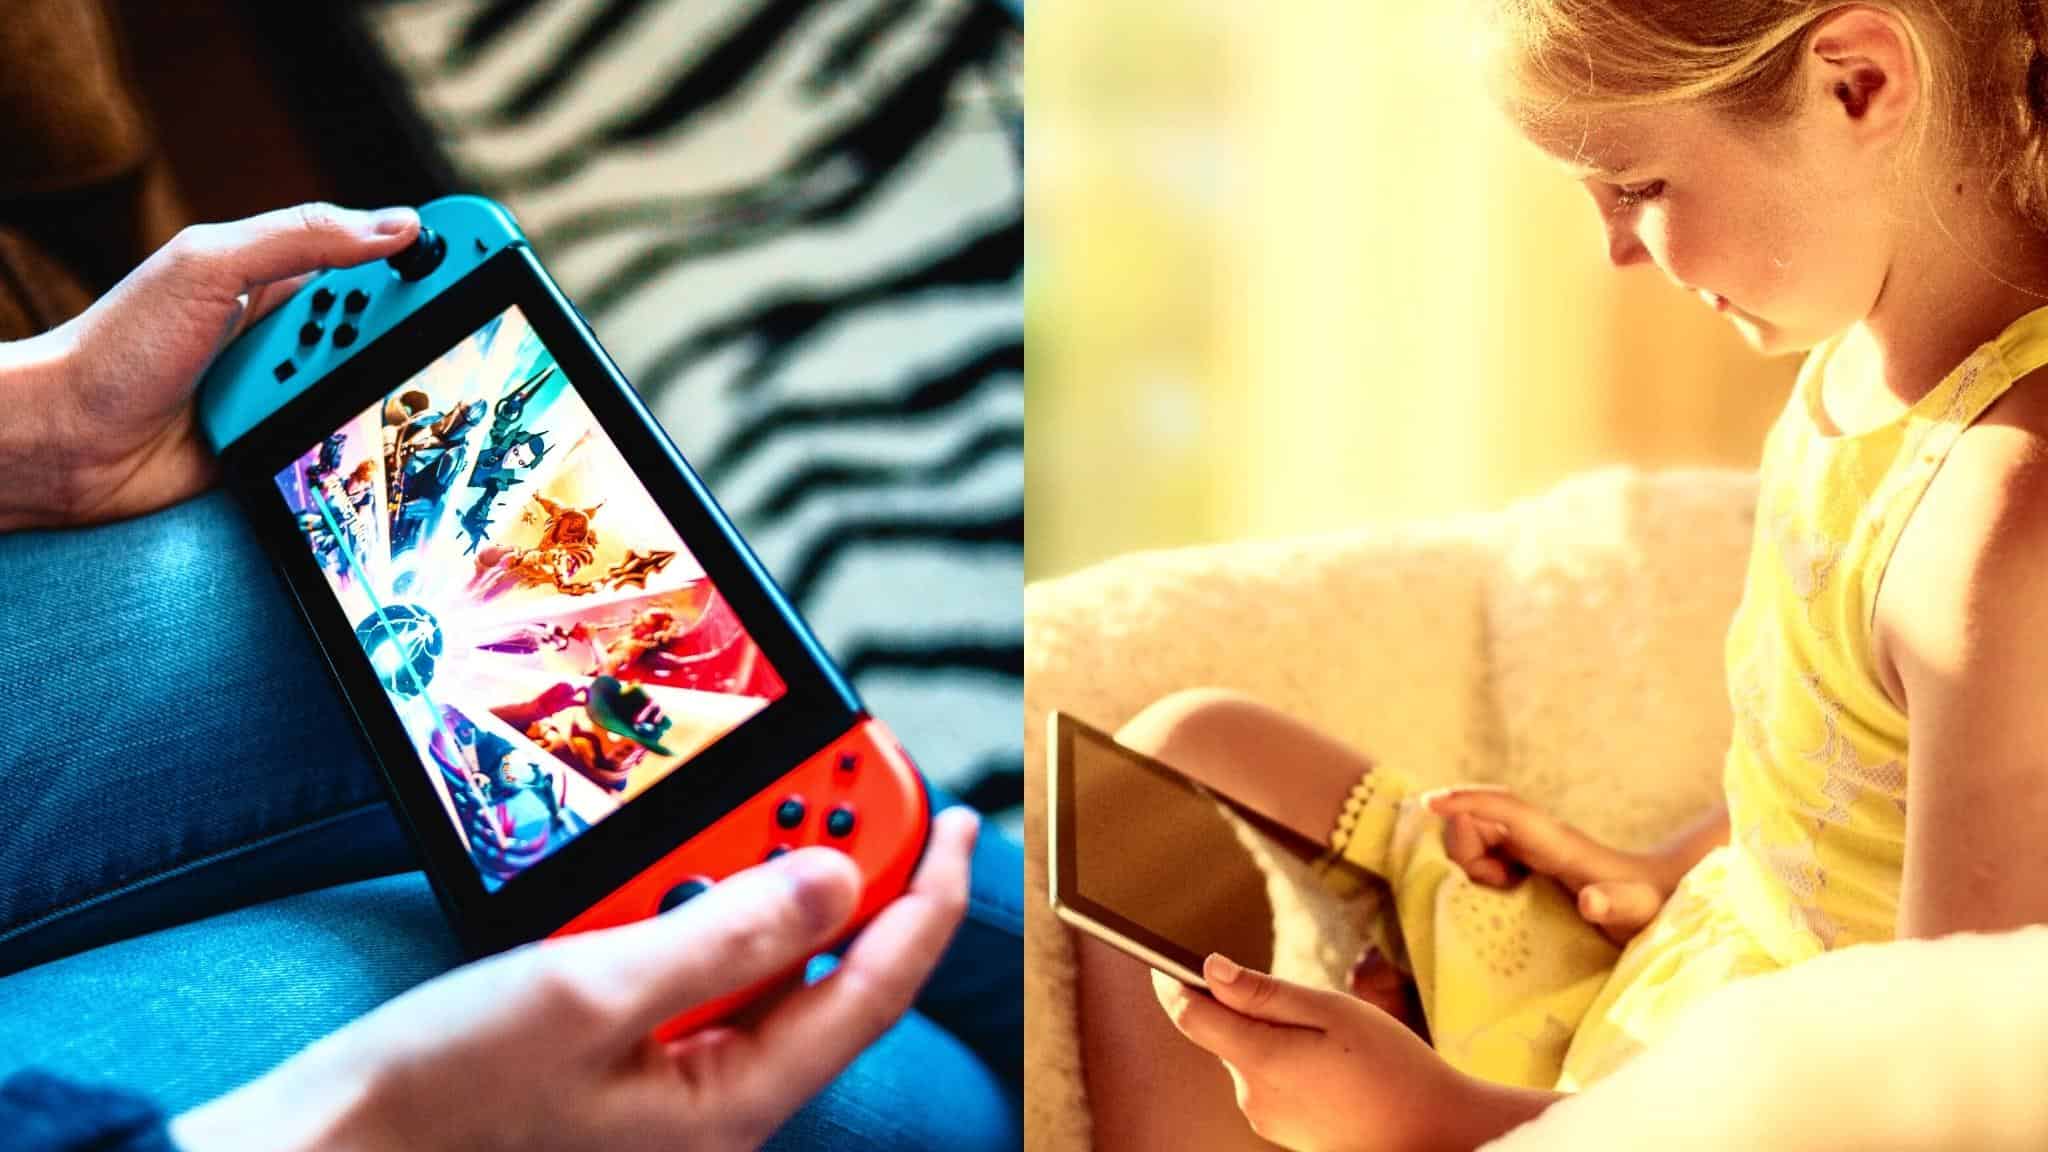 Nintendo Switch Or Kids Tablet? 3 Tips To Help Choose